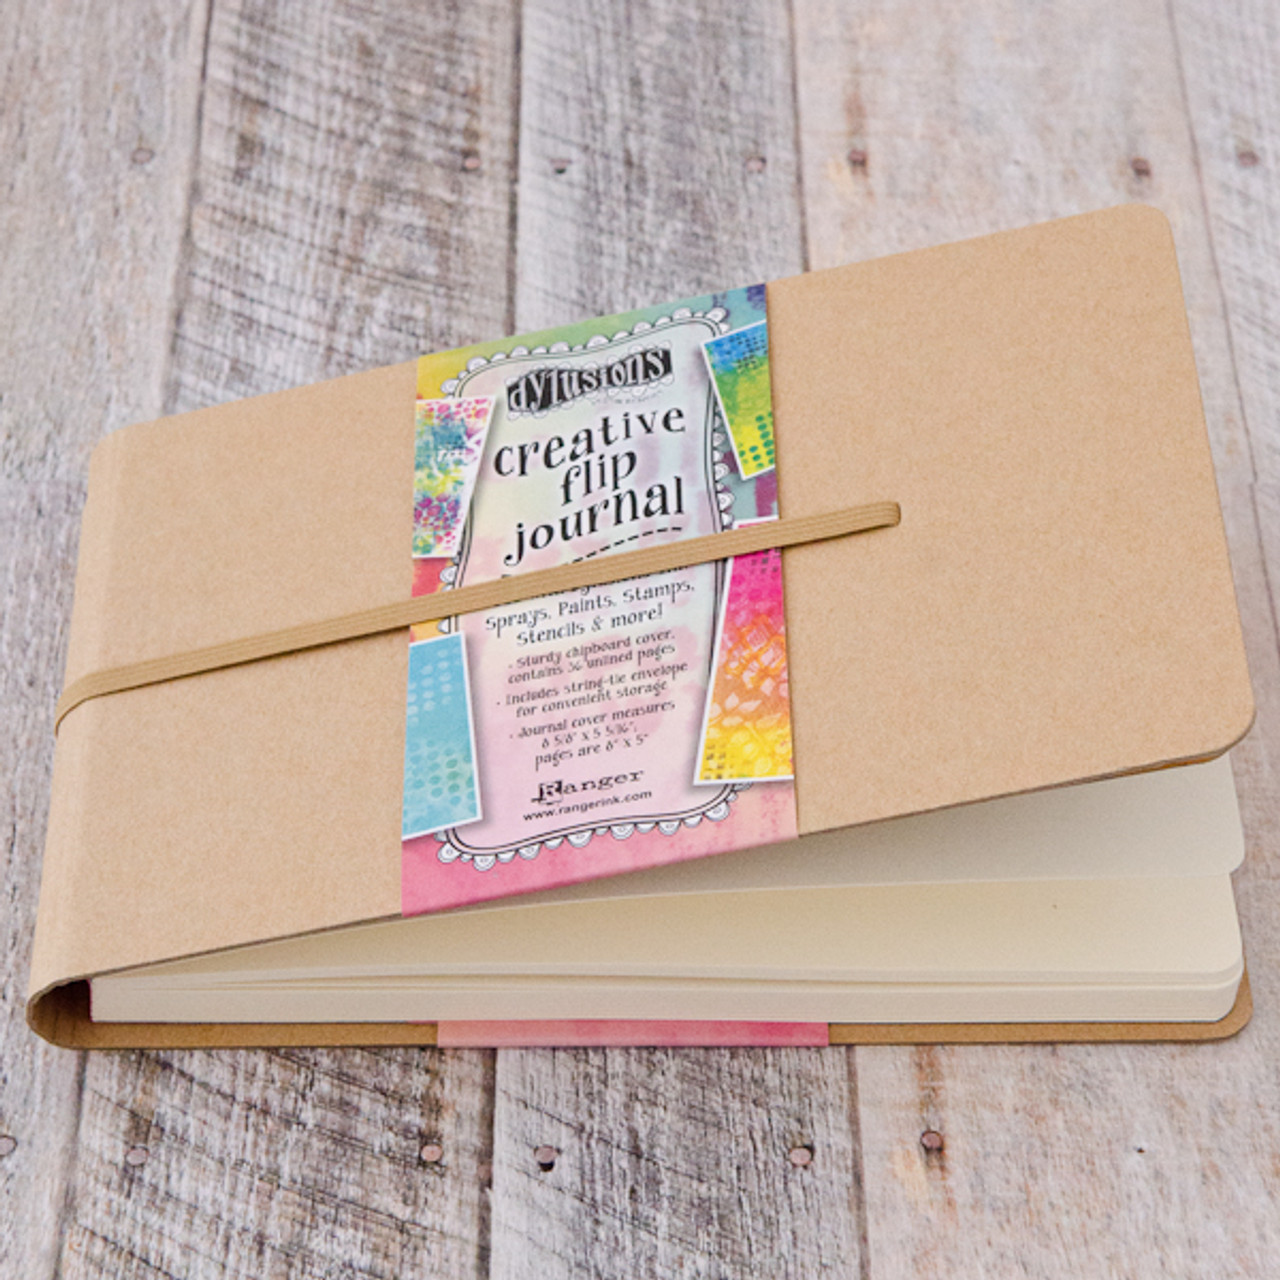  Ranger The Crafters Workshop Creative Journal Small